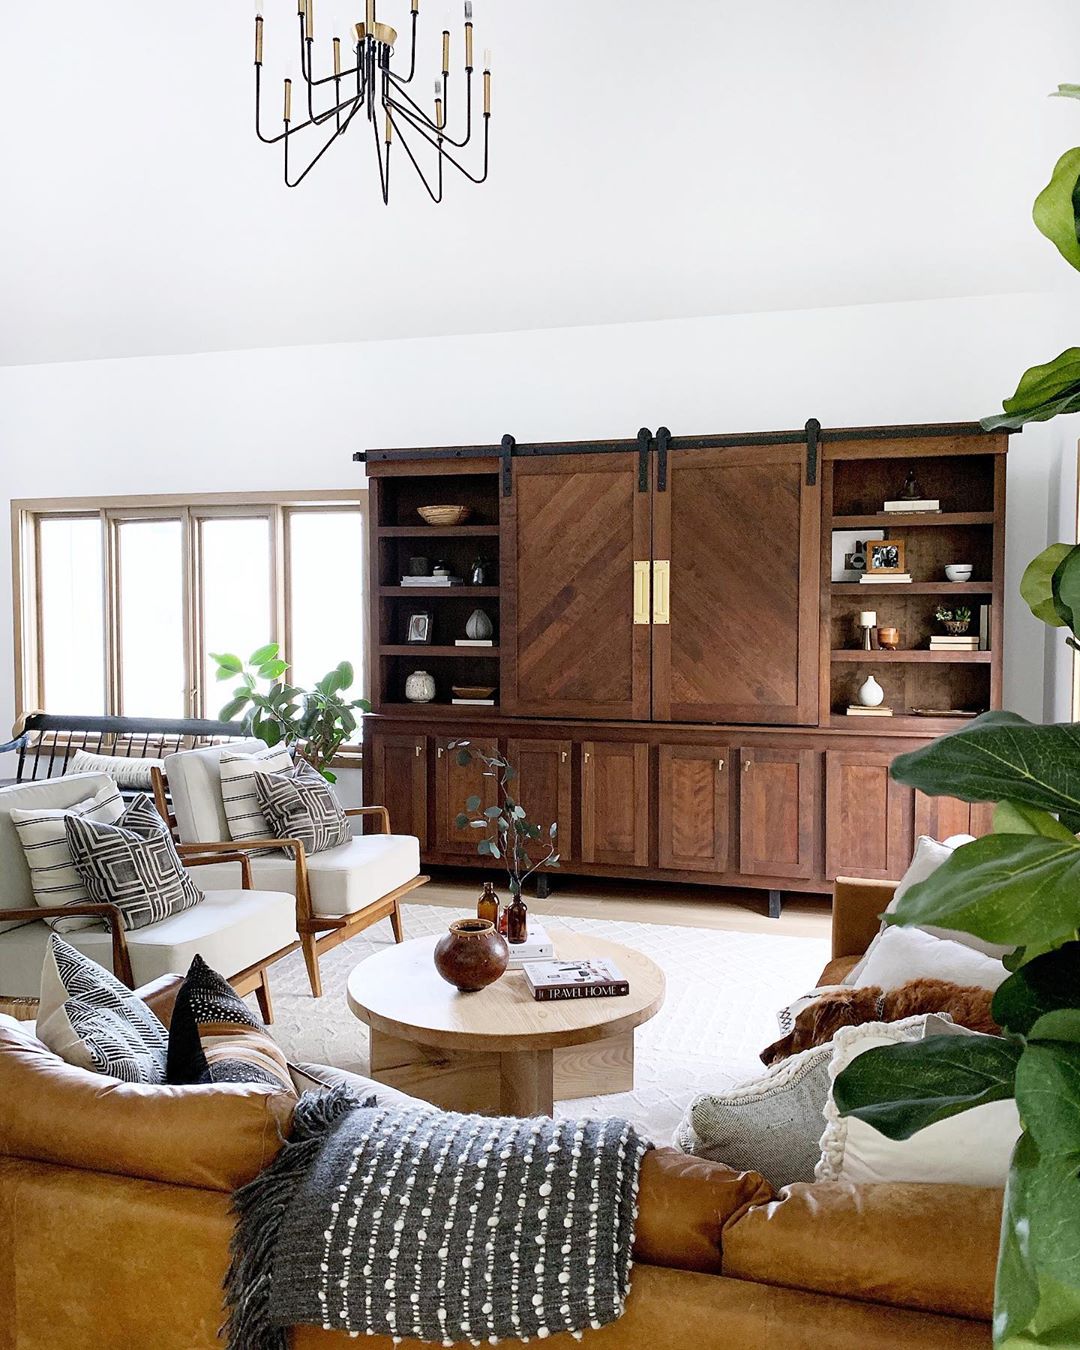 Feng Shui living room: Finding the inner center in your home